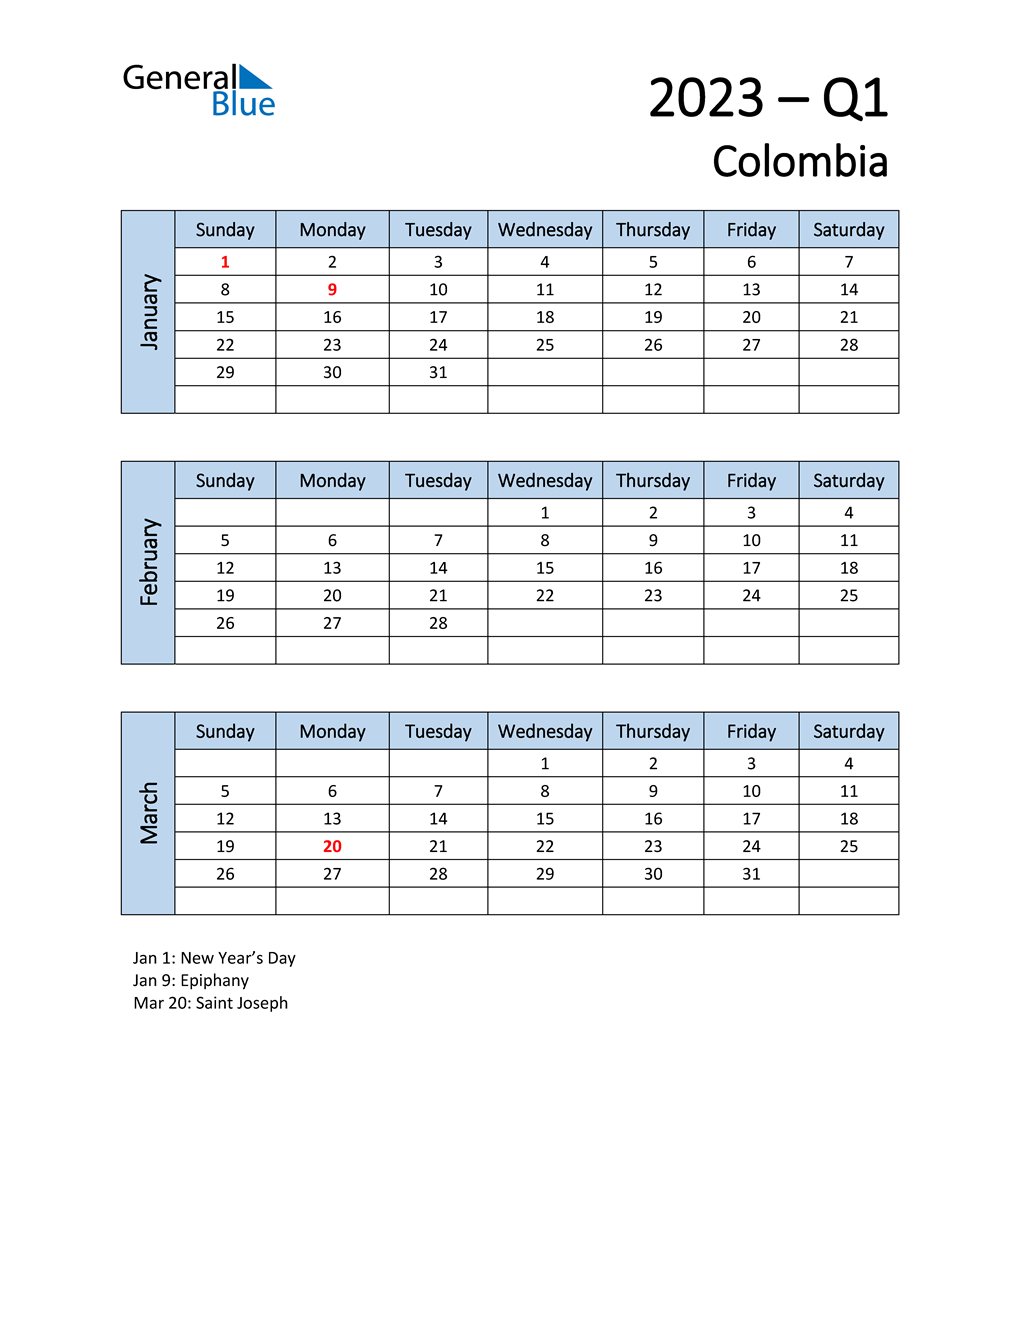  Free Q1 2023 Calendar for Colombia